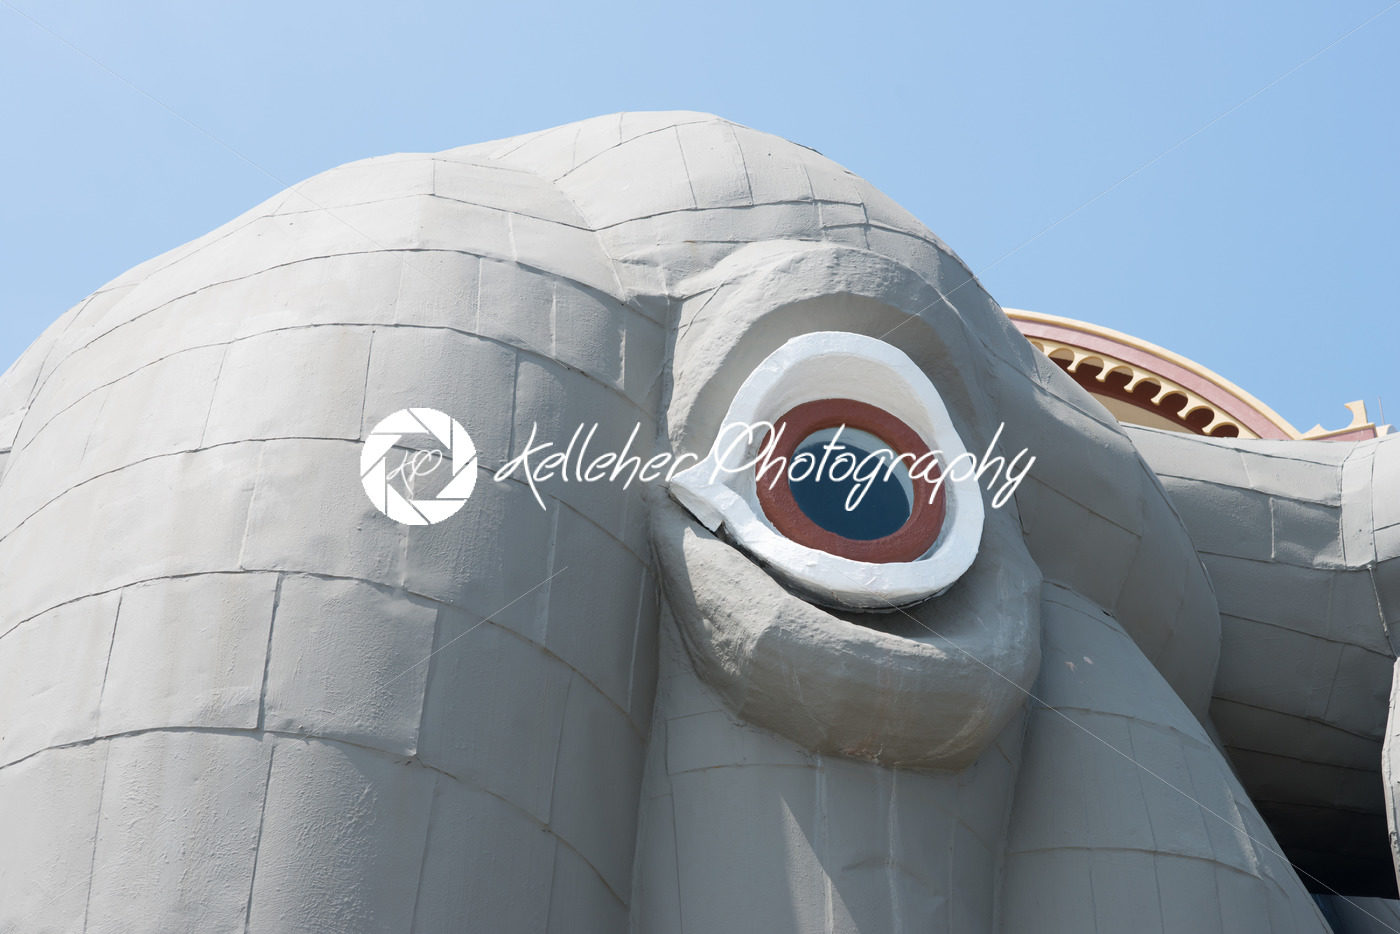 MARGATE, NJ – AUGUST 16: Lucy the Elephant on August 16, 2016 - Kelleher Photography Store